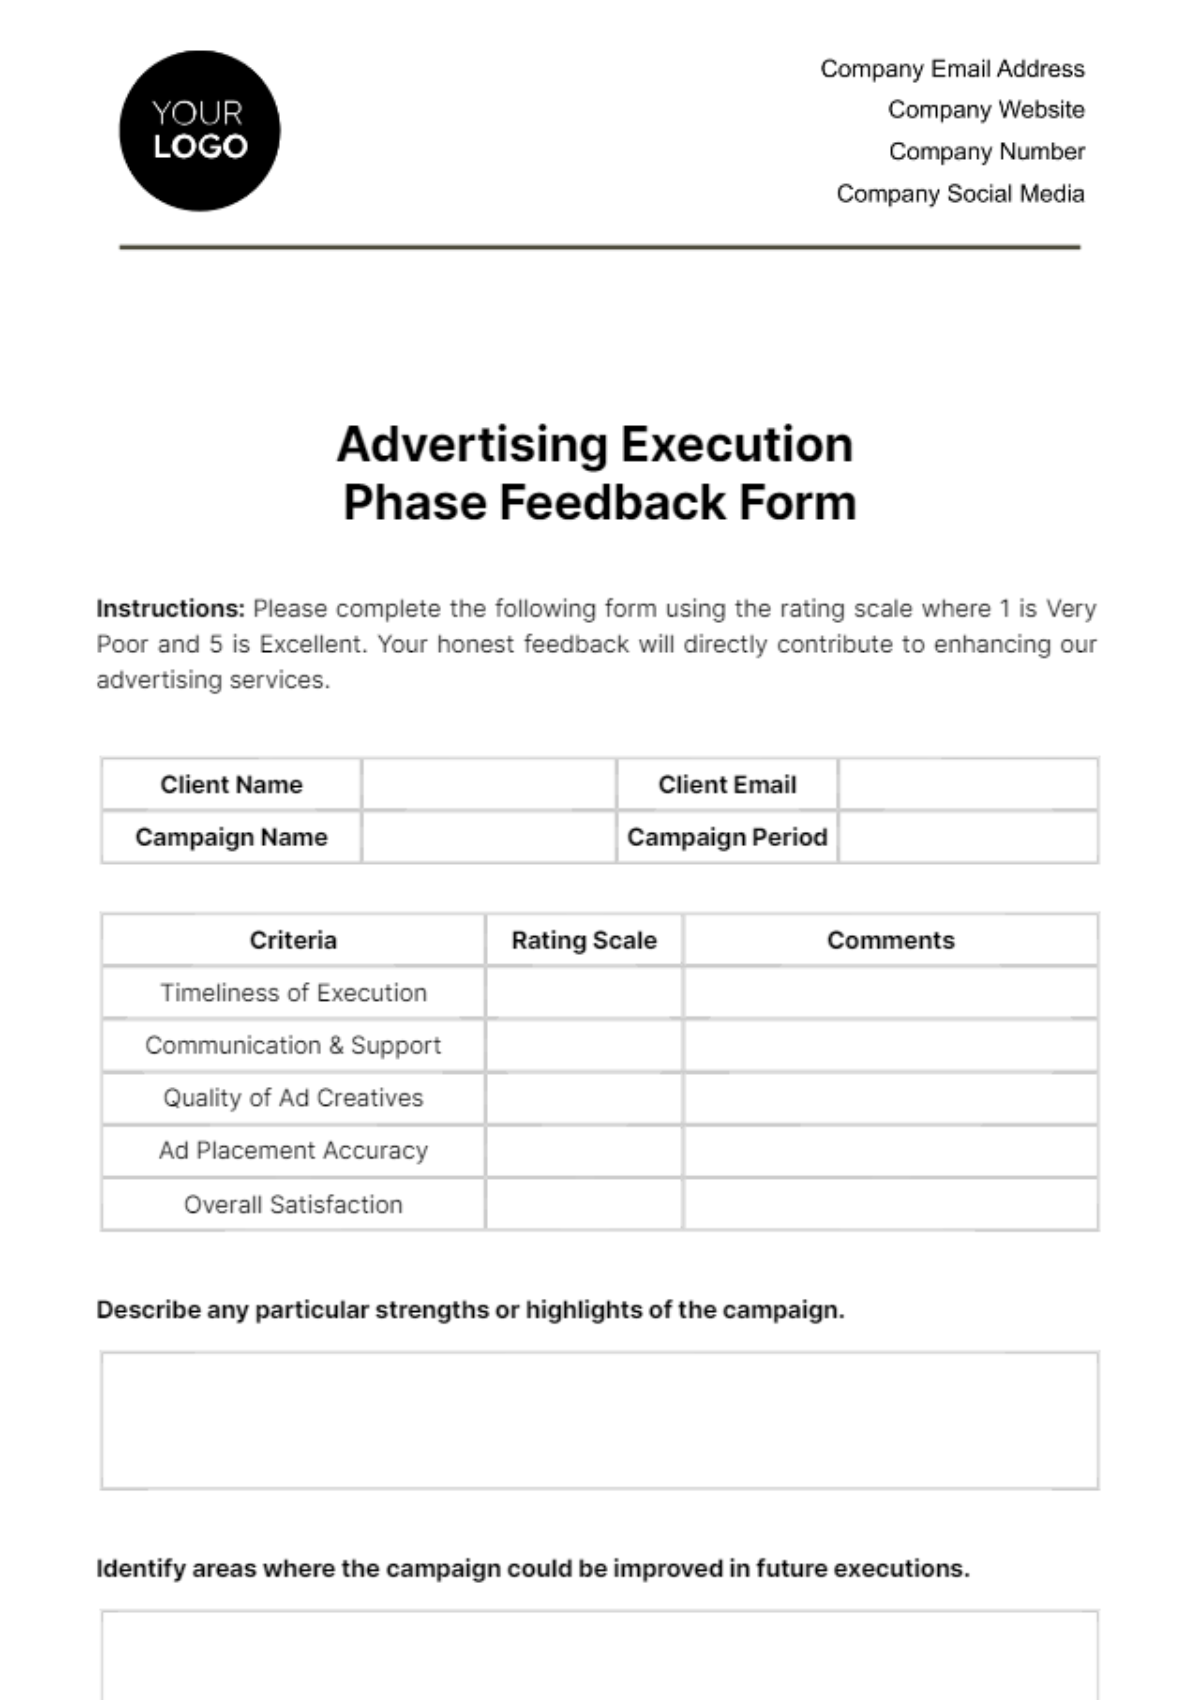 Advertising Execution Phase Feedback Form Template